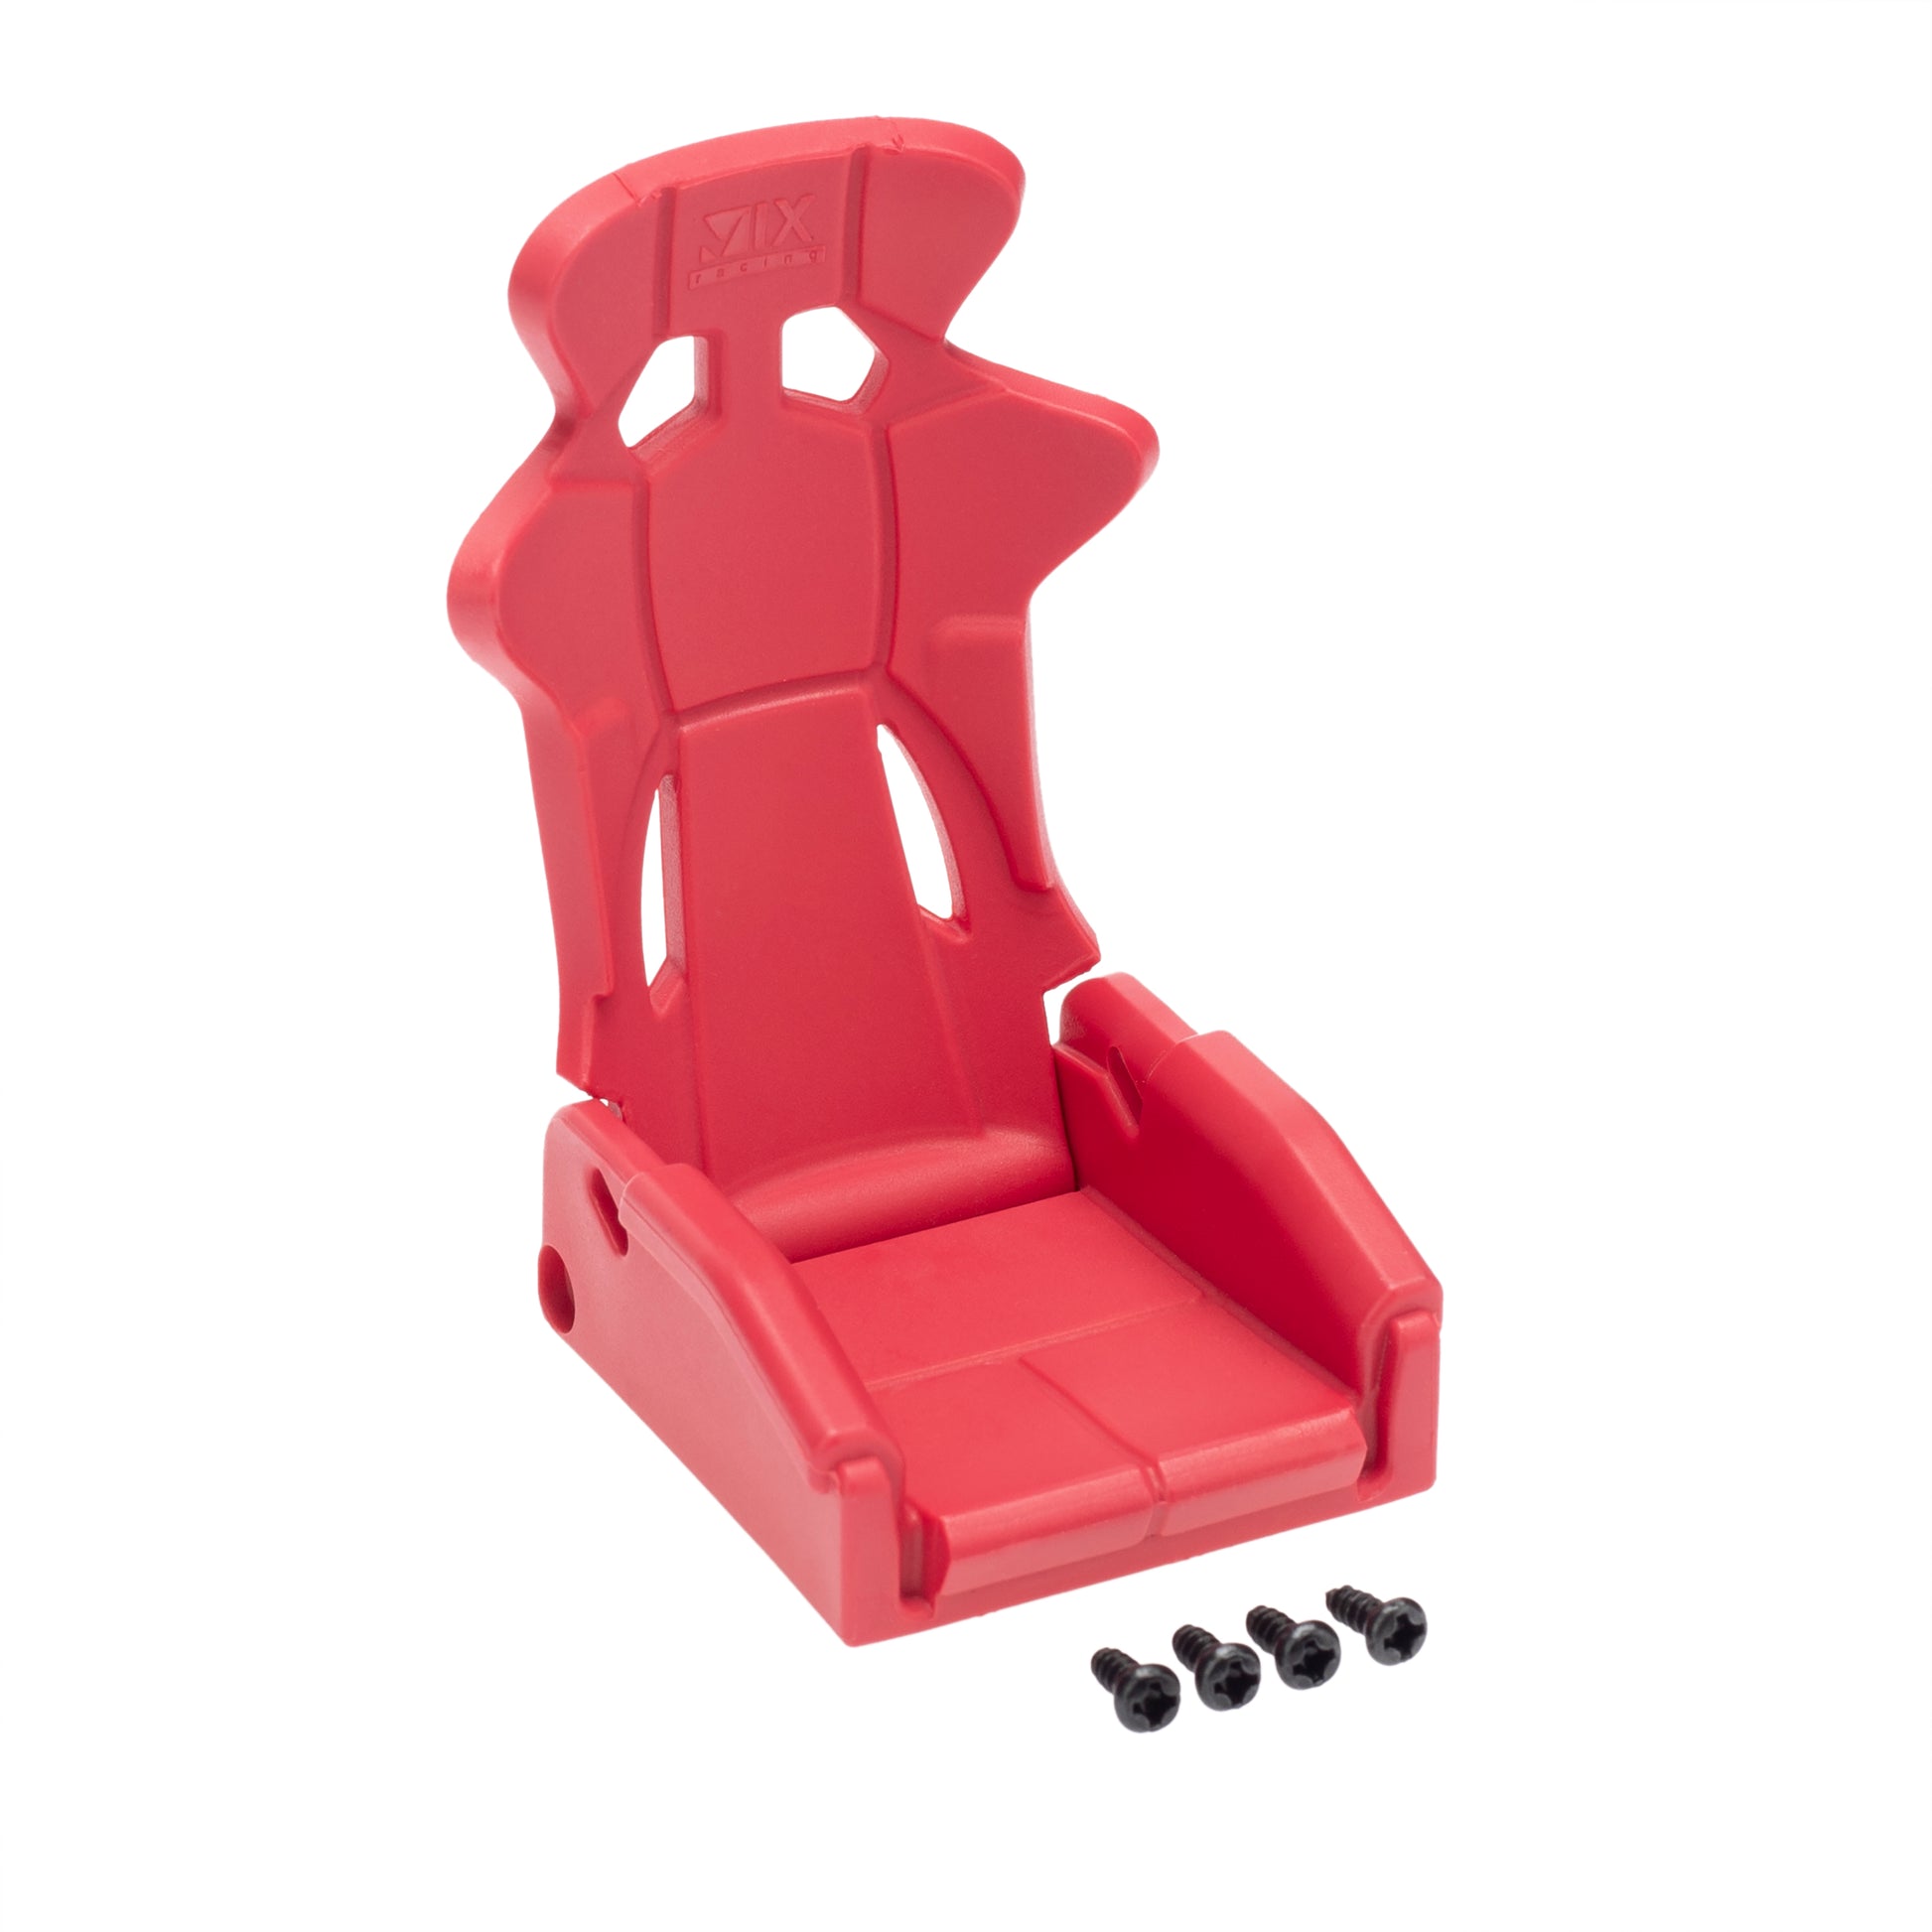 Red Simulation Driving Seat for SCX10, TRX-4-4